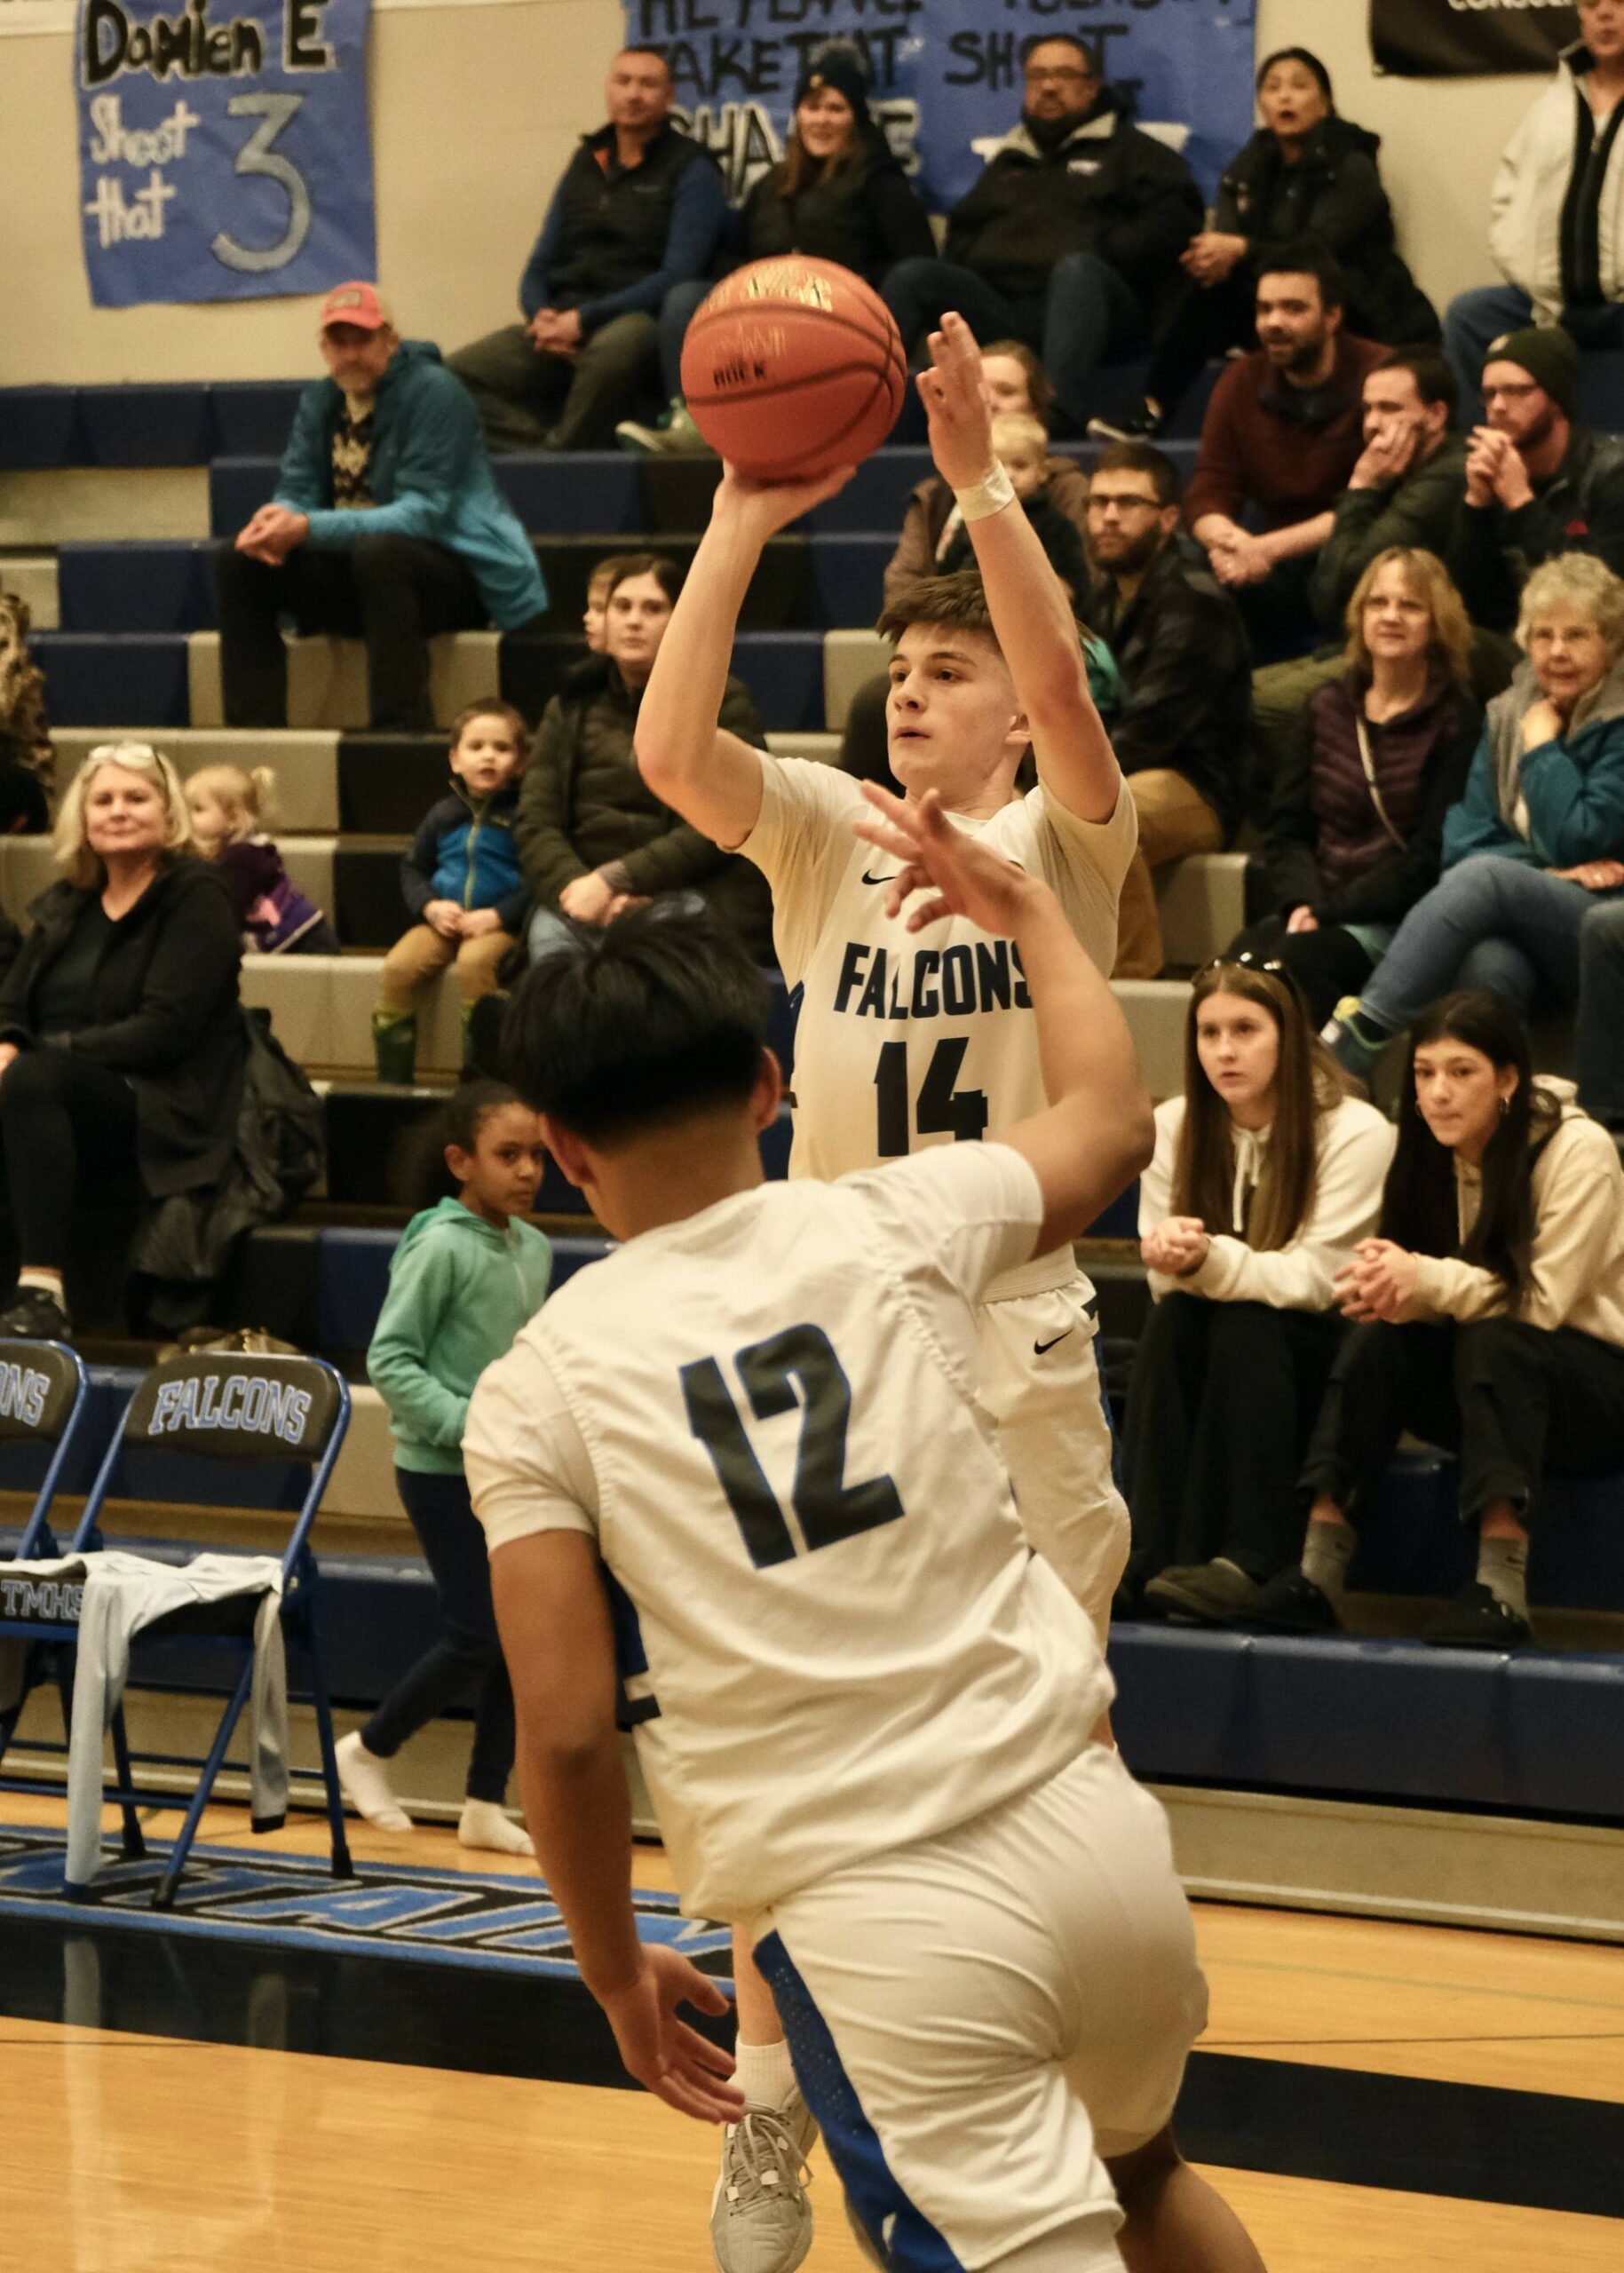 Thunder Mountain senior Samuel Lockhart (14) shoots from the arc as sophomore Joren Gasga signals a “three” during the Falcons 71-49 win over the Bears, Thursday at the Thunderdome. (Klas Stolpe / For the Juneau Empire)